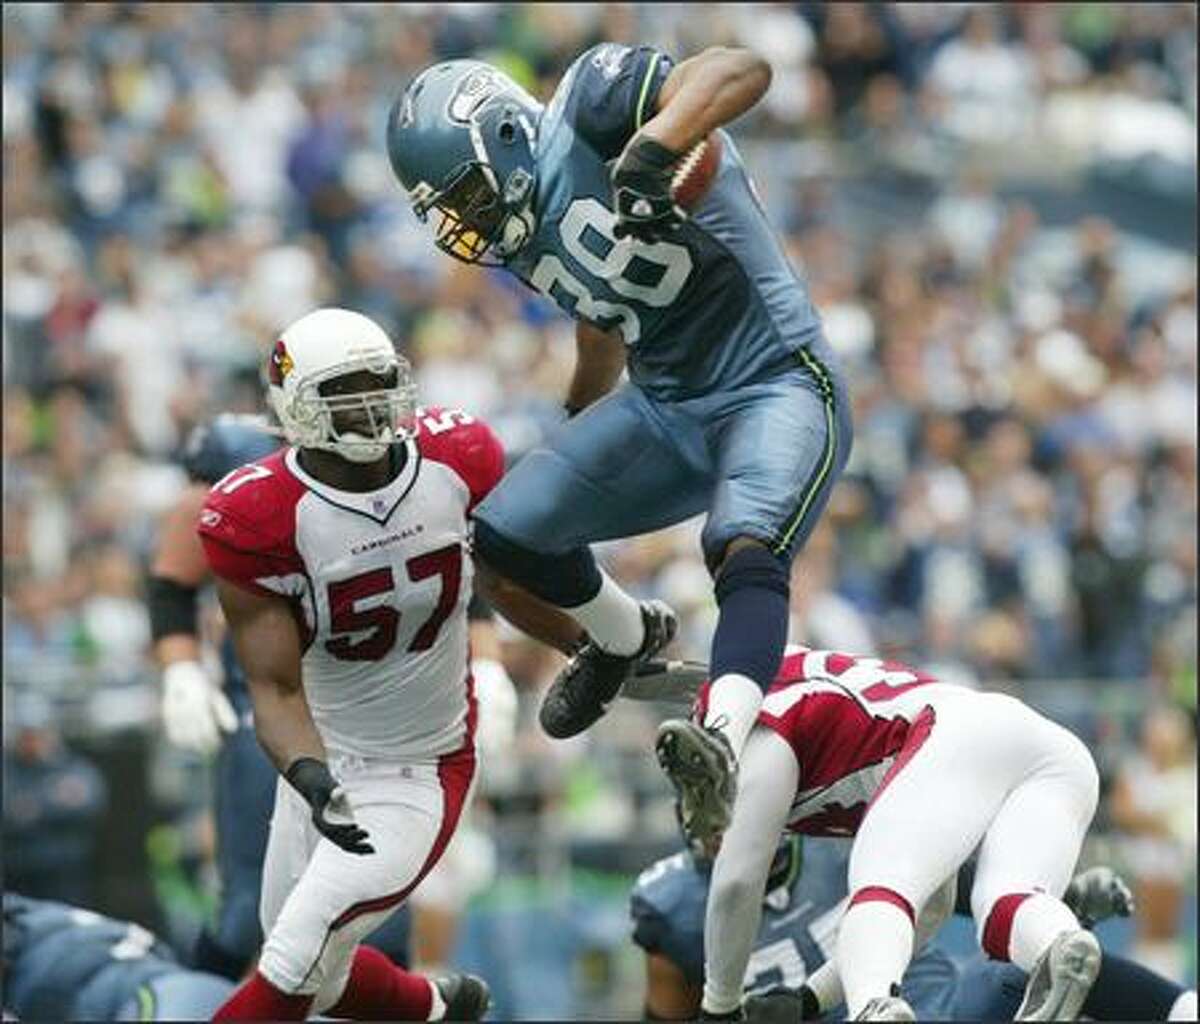 Seattle Seahawks fullback Mack Strong leaps while rushing for a 14-yard gain against Arizona Cardinals during a game at Qwest Field on Sunday, September 17, 2006. (Dan DeLong/Seattle Post-Intelligencer)